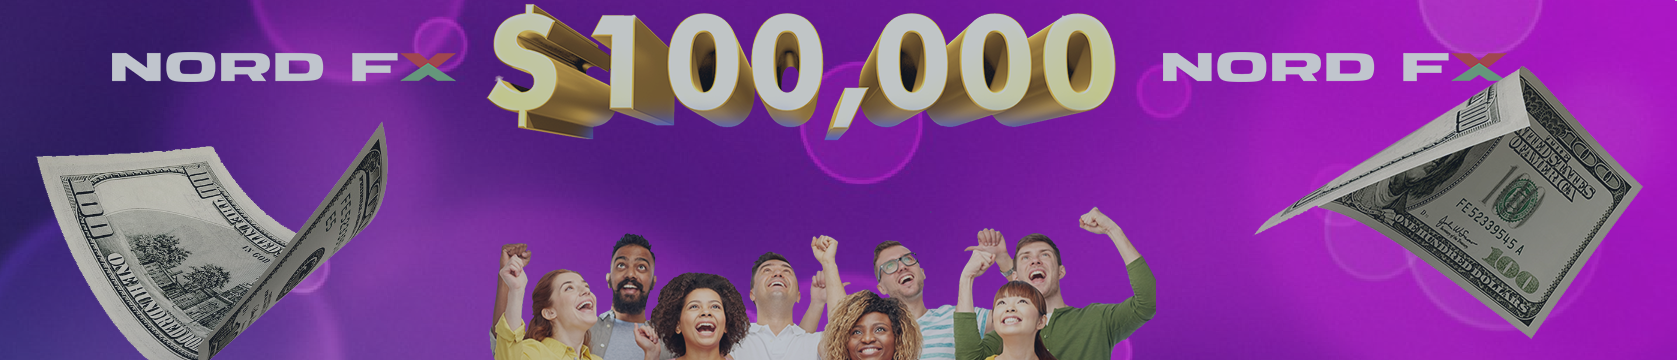 NordFX Super Lottery: First 54 Prizes Worth $20,000 Drawn